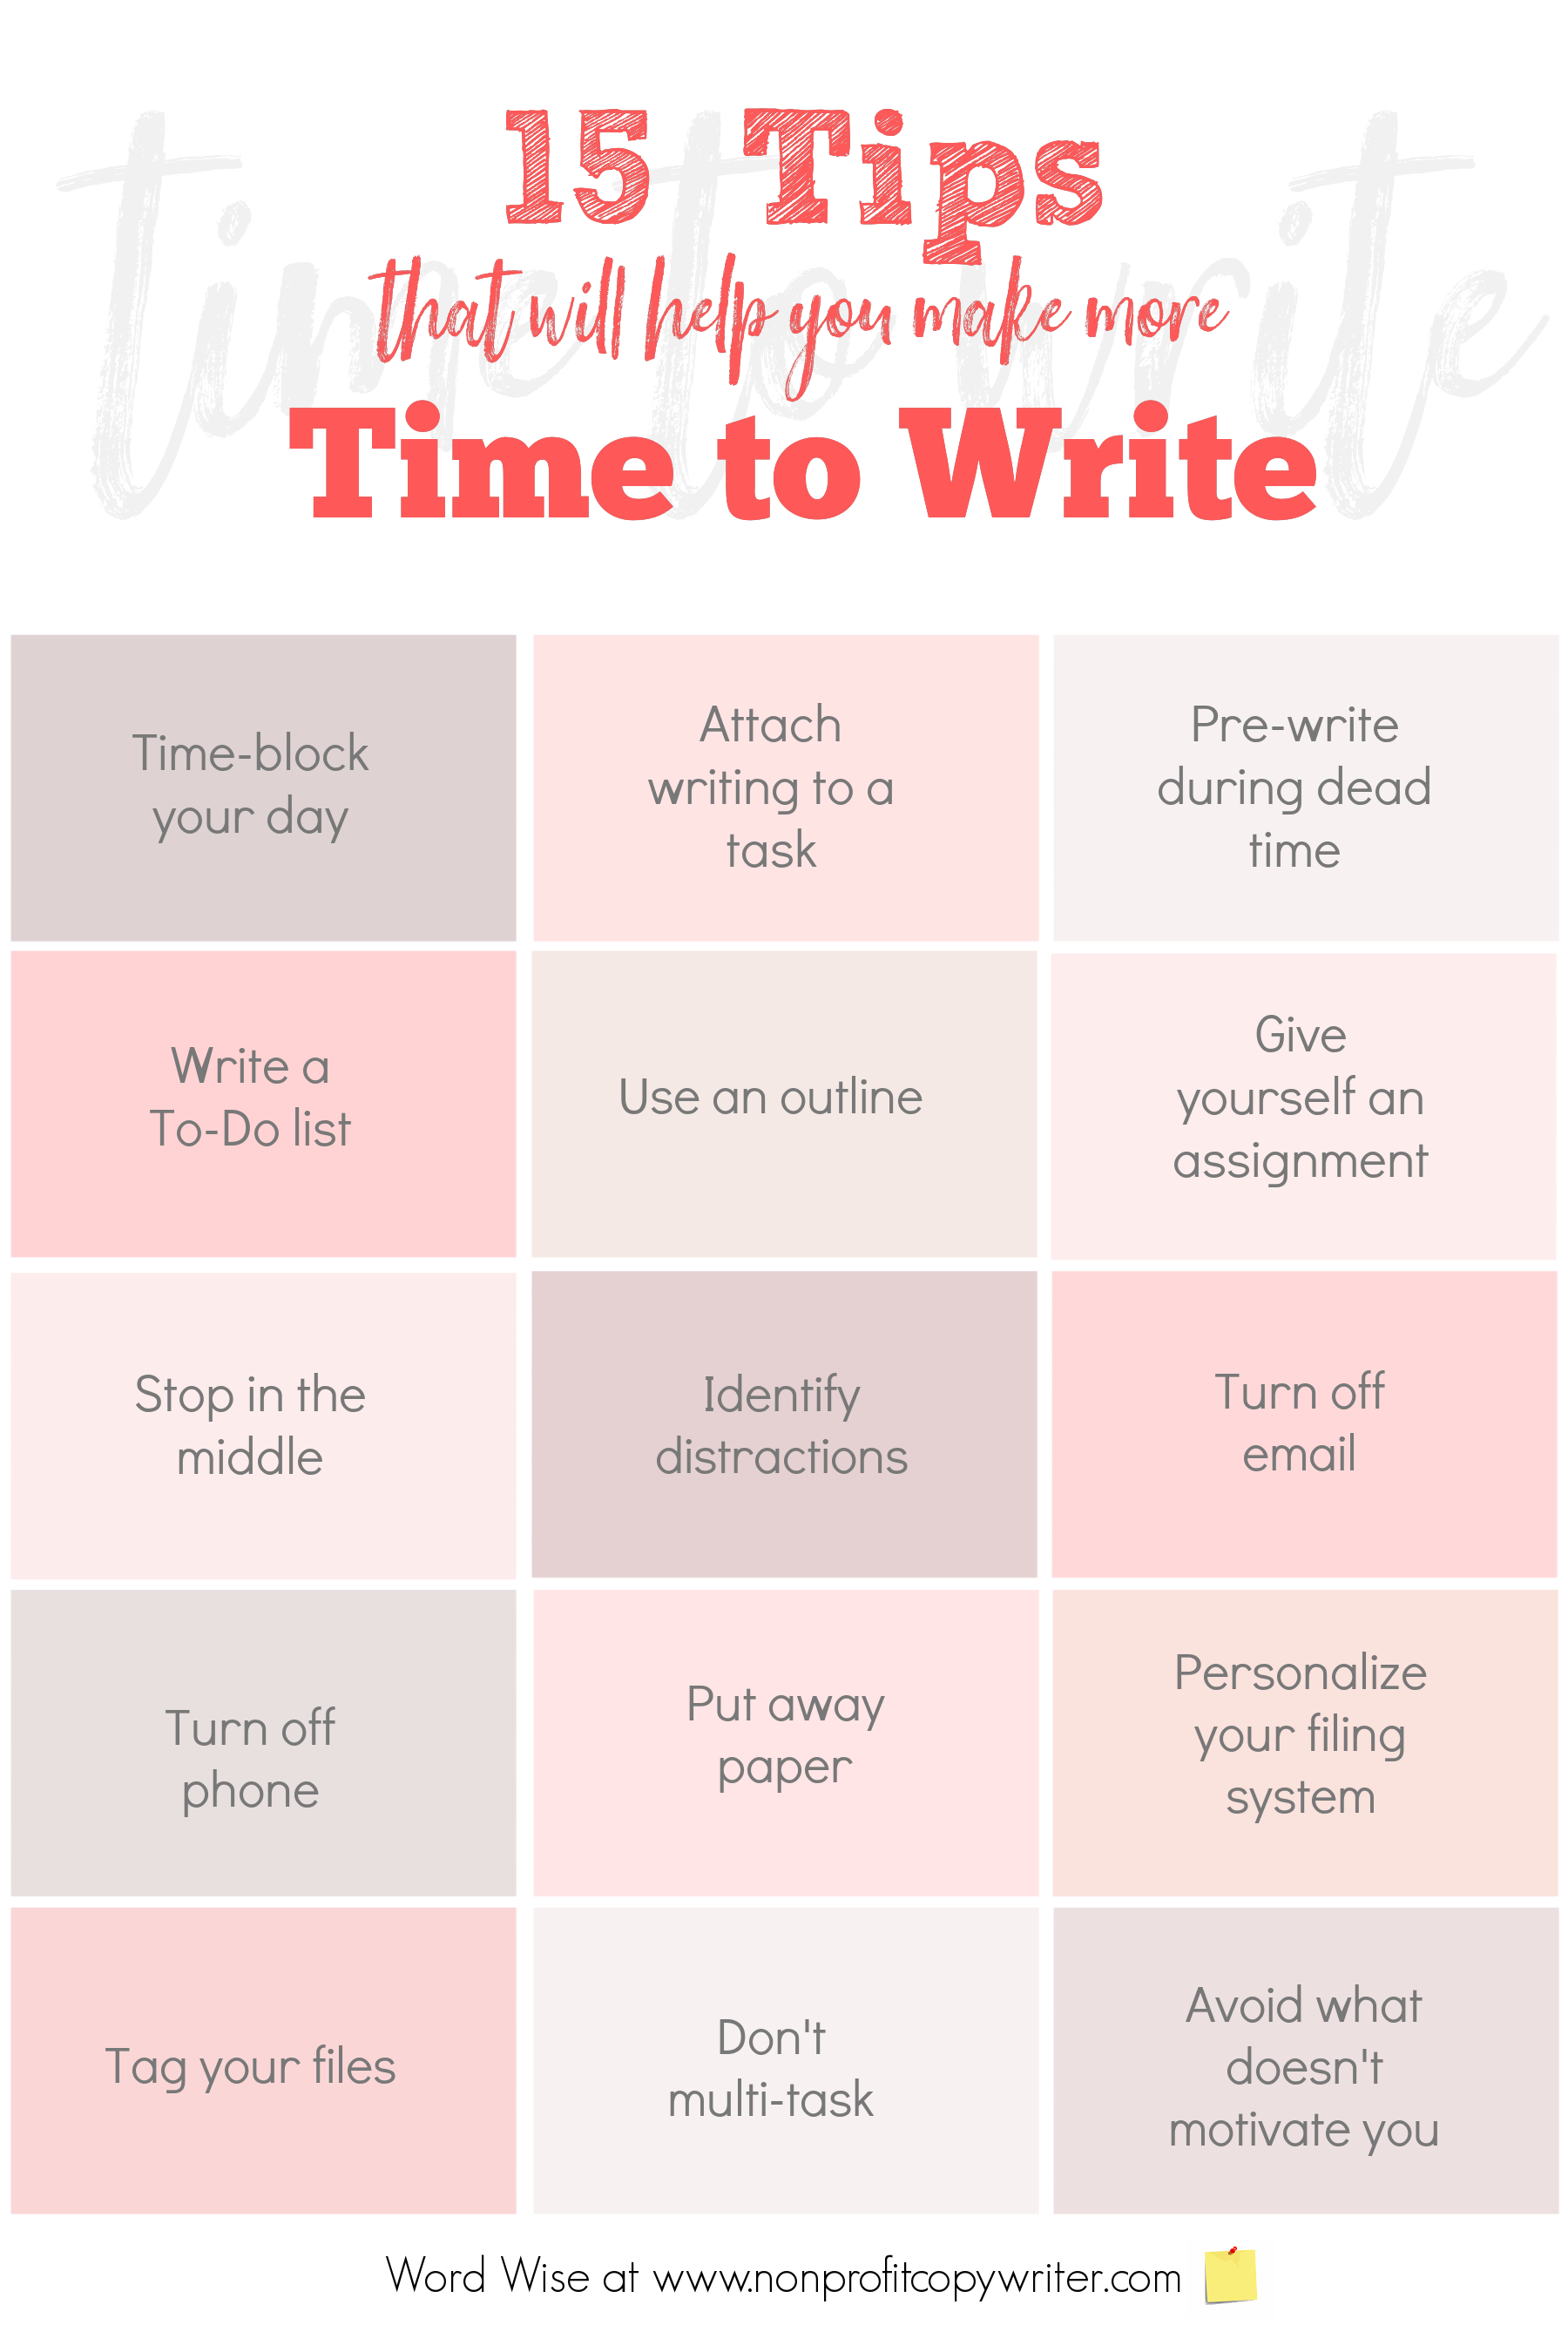 Use these 15 tips to make time to write with Word Wise at Nonprofit Copywriter #WritingTips #Productivity